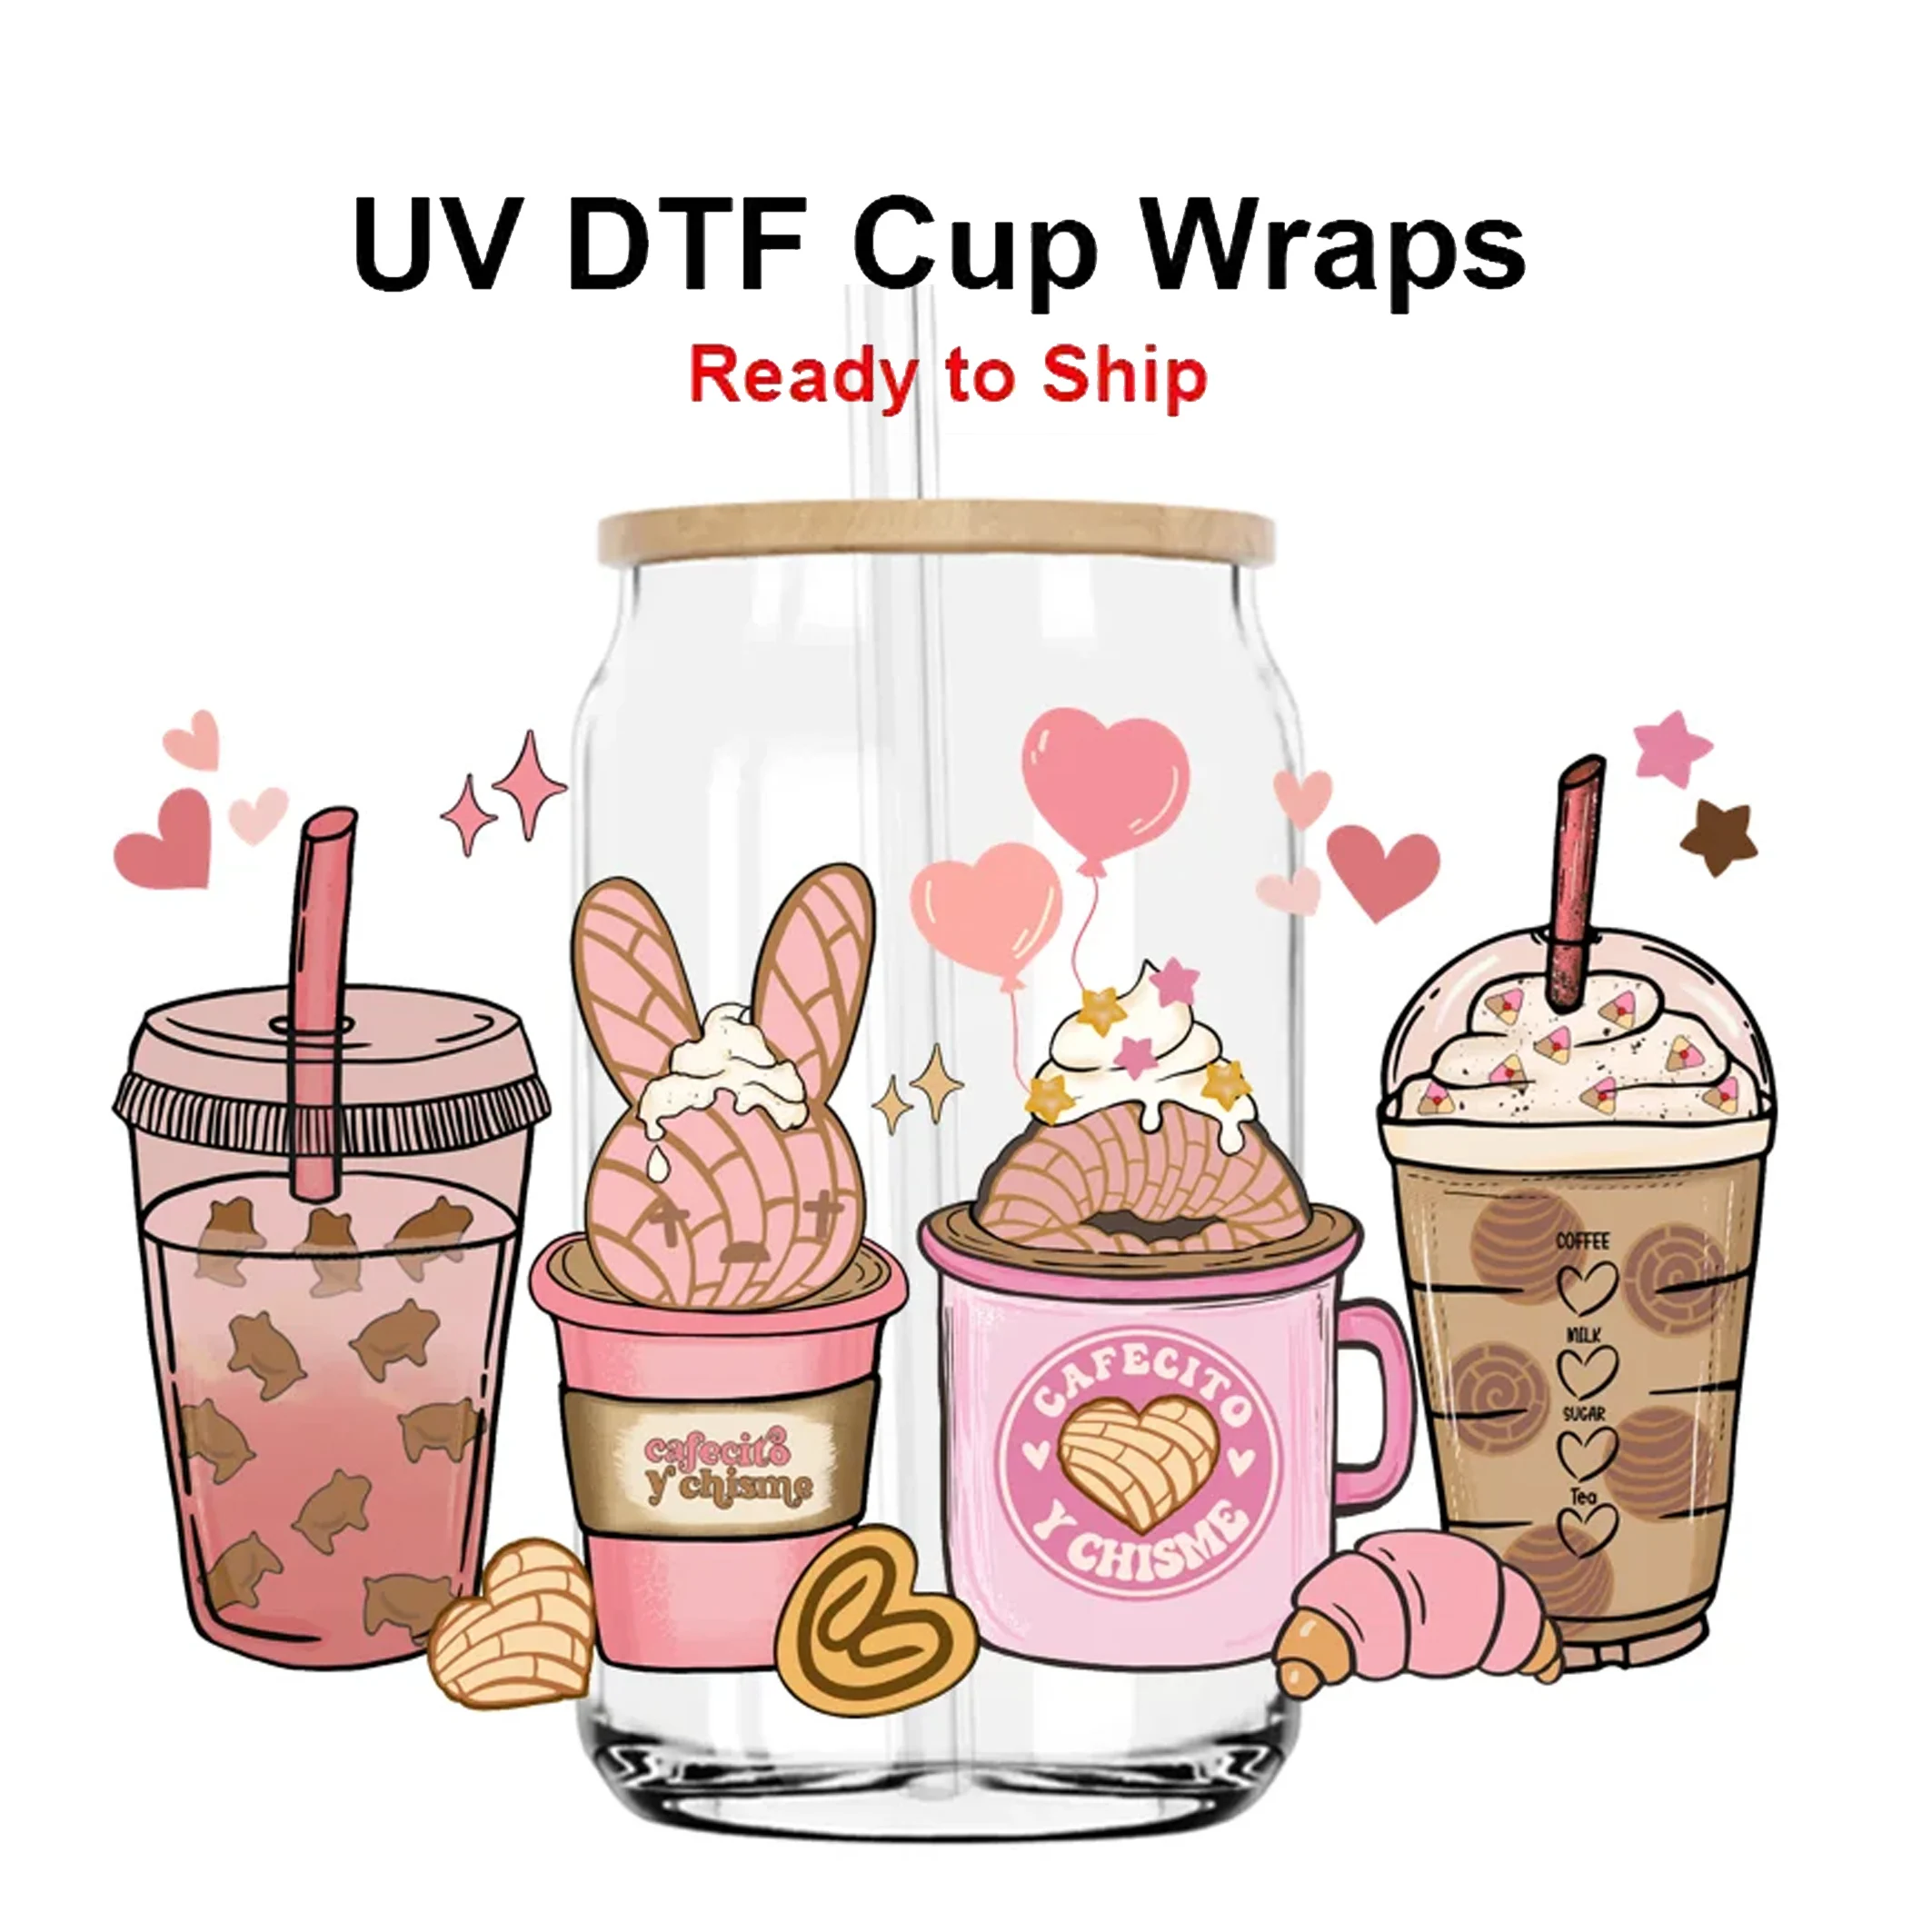 3D UV Transfer Sticker Personalized Transfer Printed Self-Adhesive Stickers Waterproof Transfers Stickers For Cups Wraps